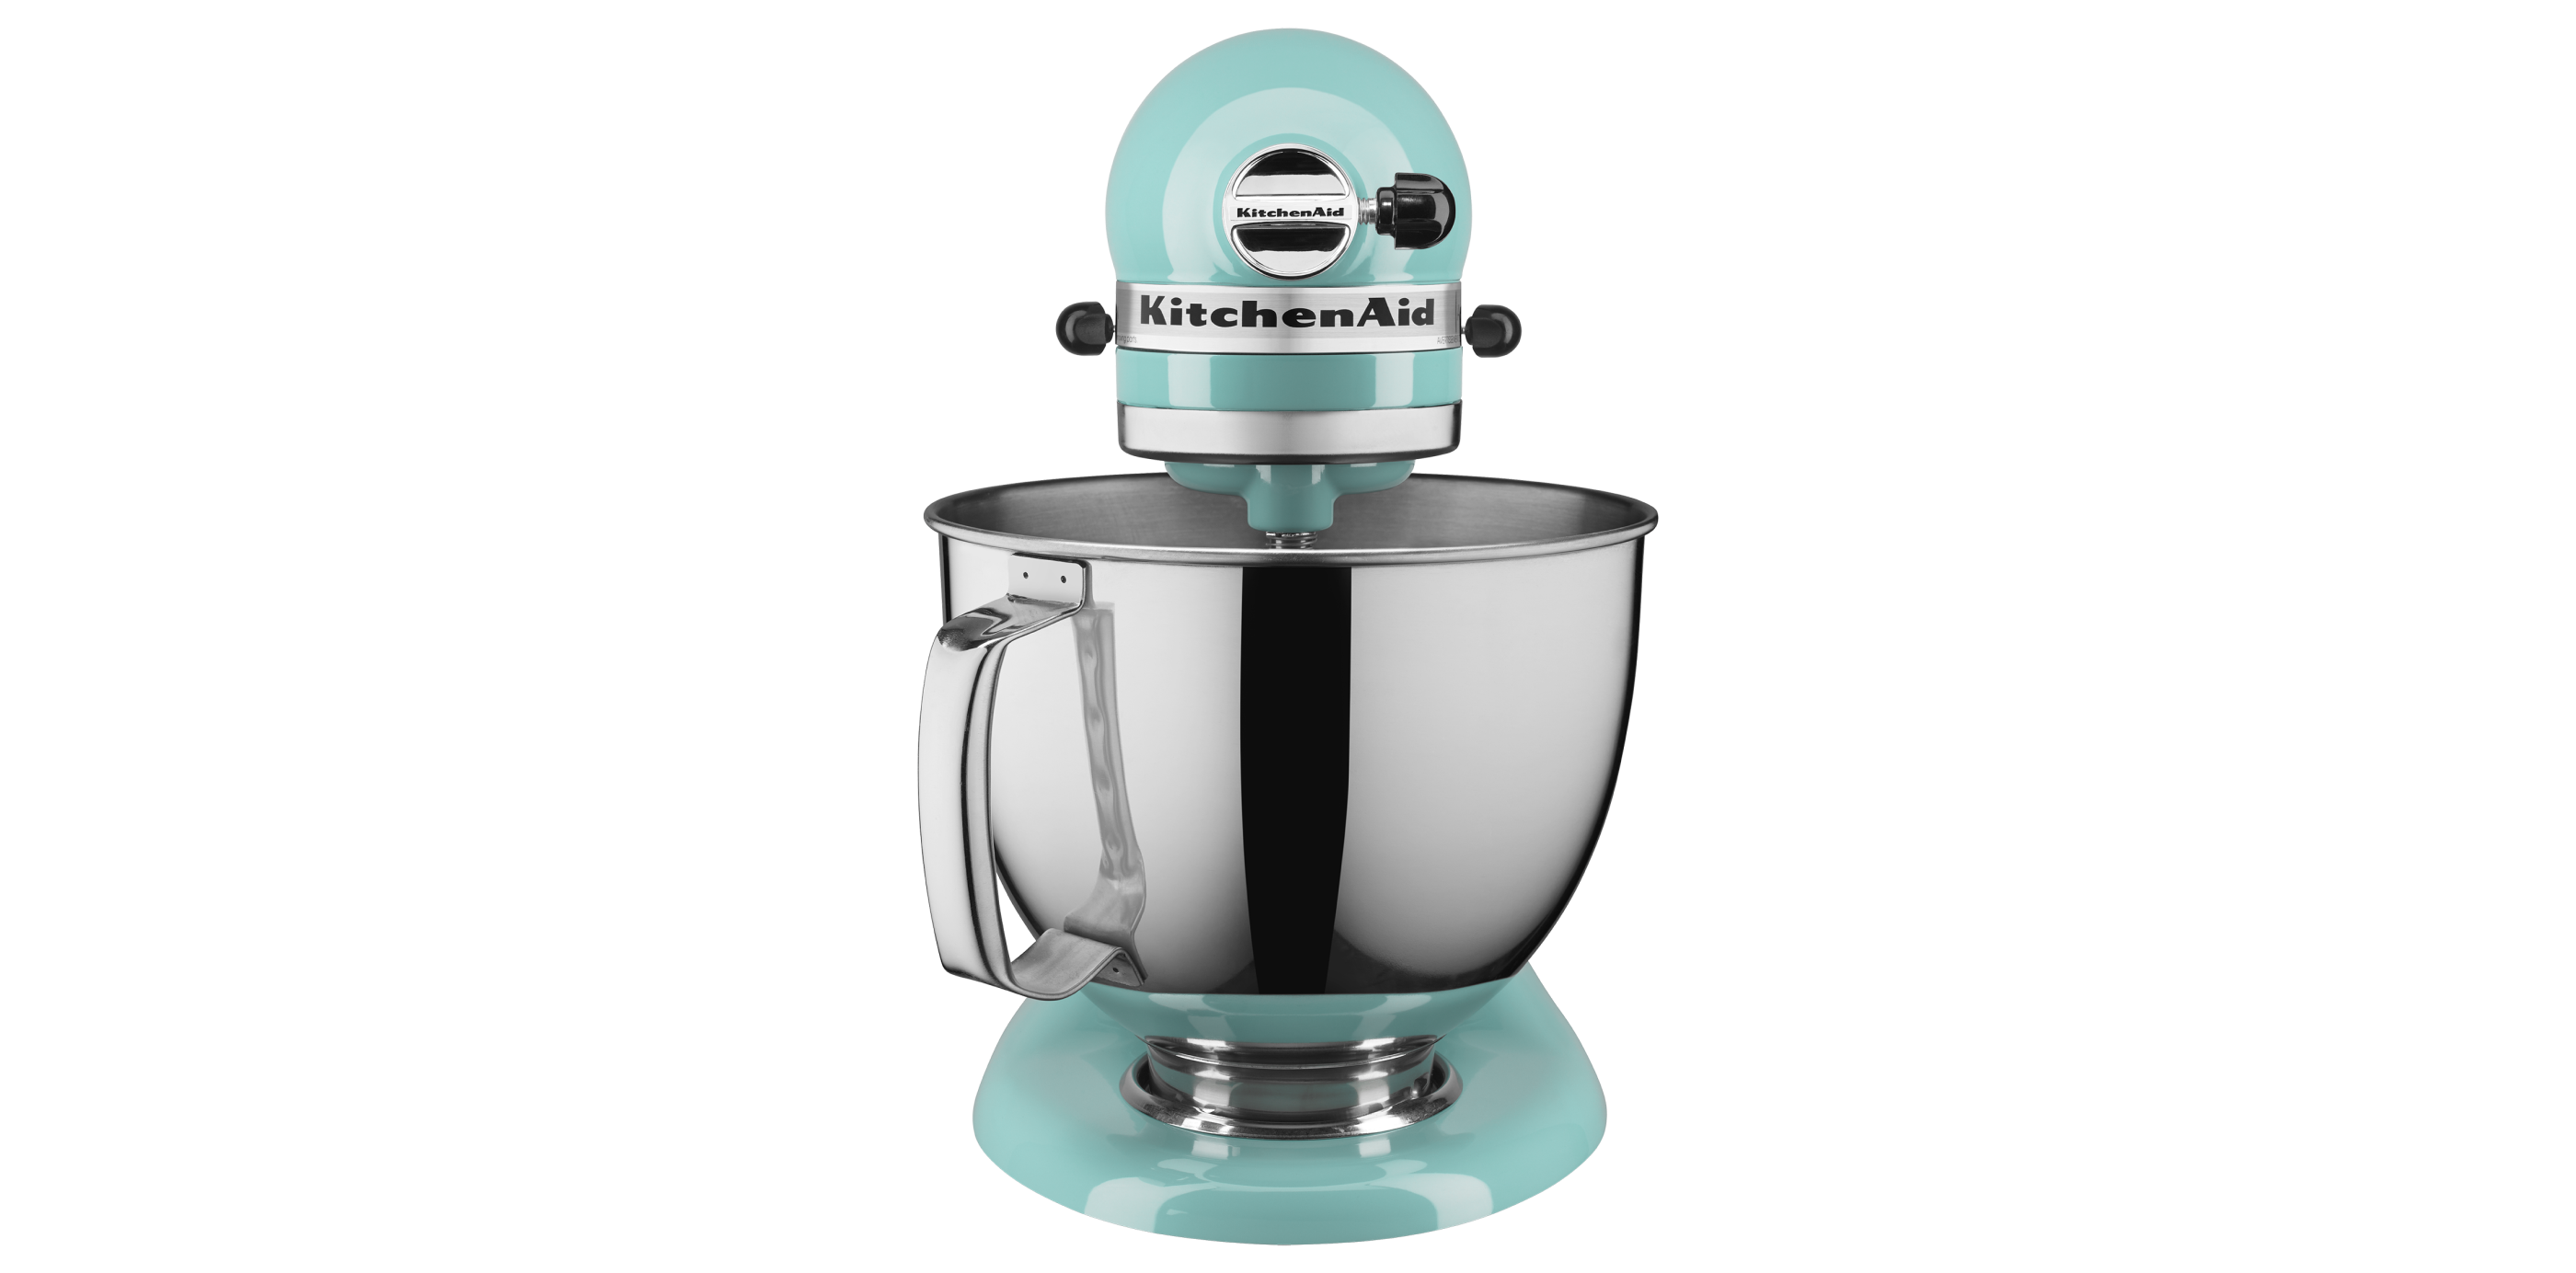 Upgrade Your KitchenAid Mixer! Protect it with the Everdime! 